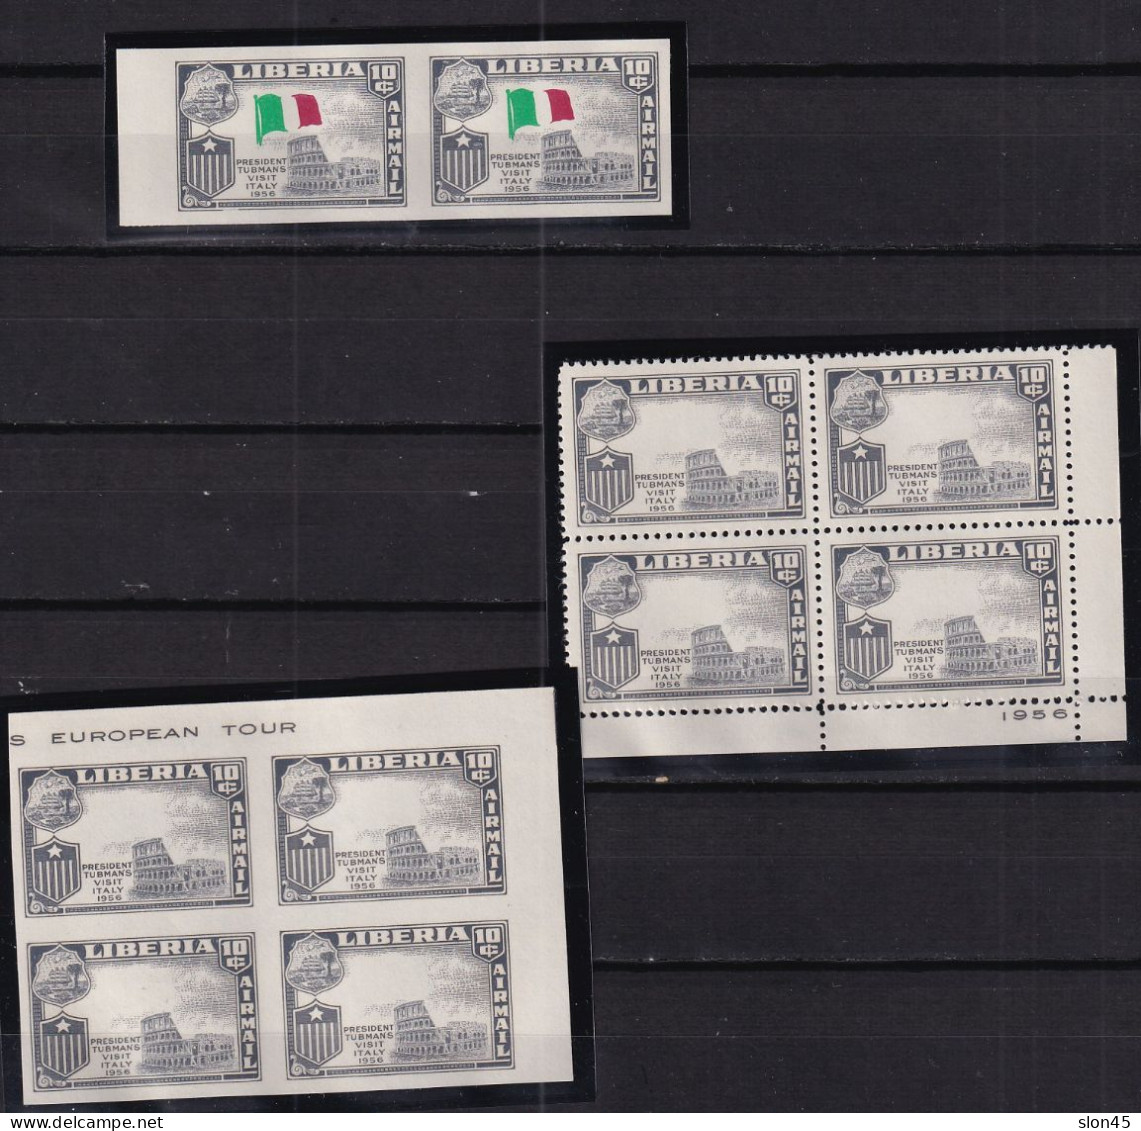 Liberia 1958 Italy Varieties Blocks Of 2 Imperf/perf MNH Flag Missing 16008 - Erreurs Sur Timbres